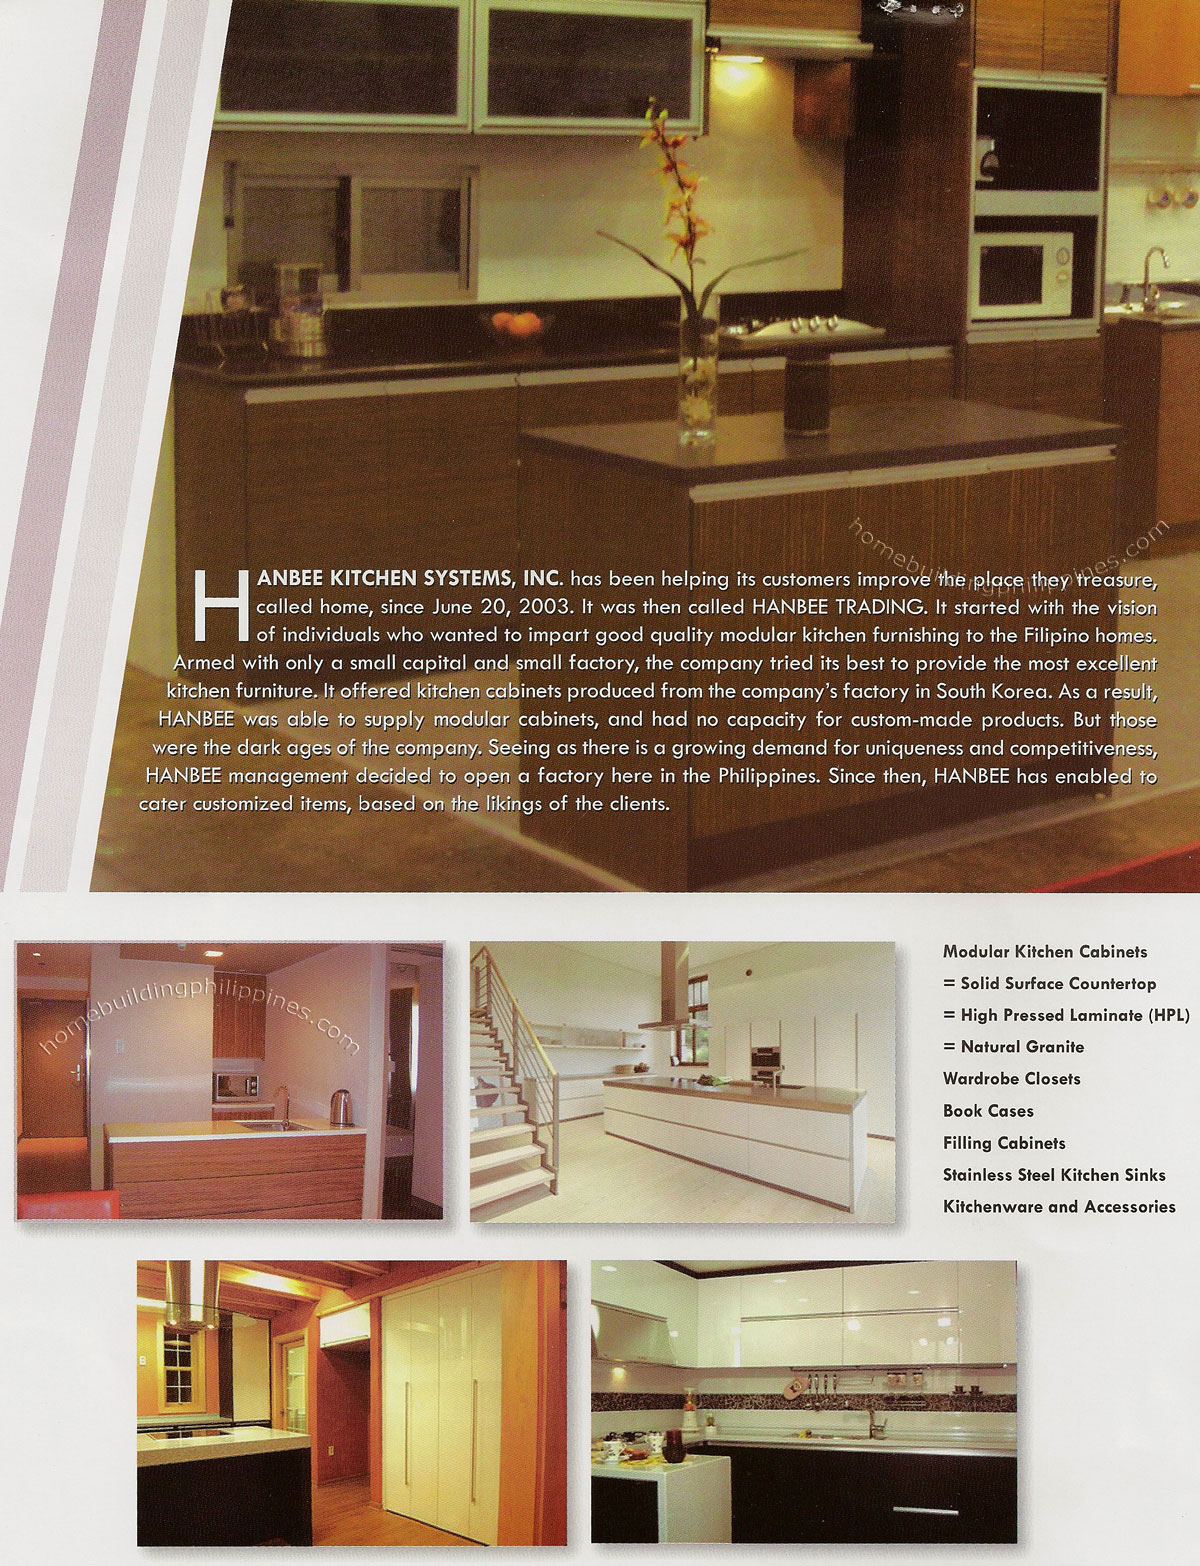 Modular Kitchen Cabinets Solid Surface Countertop High Pressed